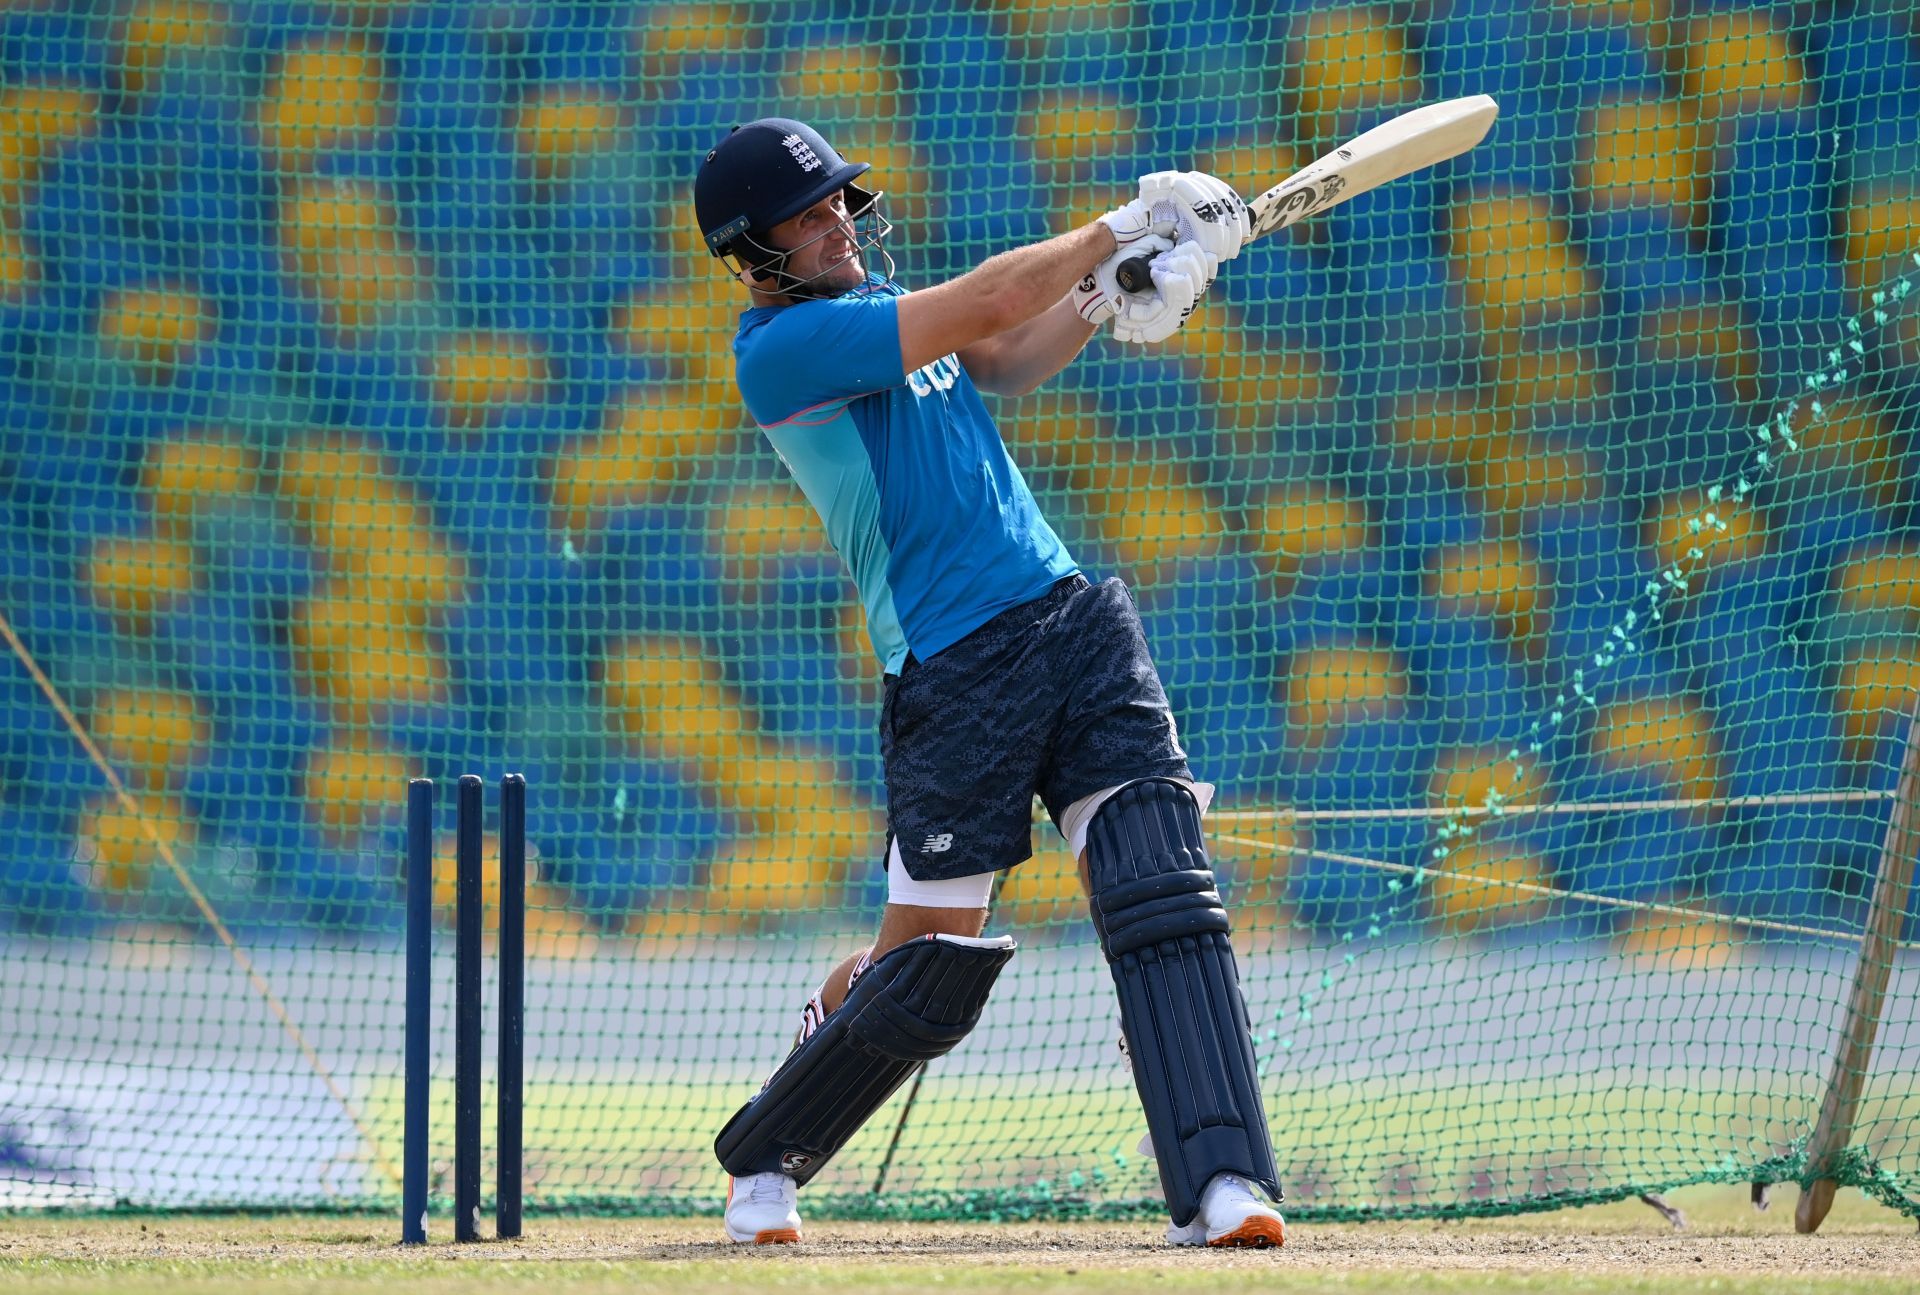 Liam Livingstone is an English player to watch out for in IPL 2022.